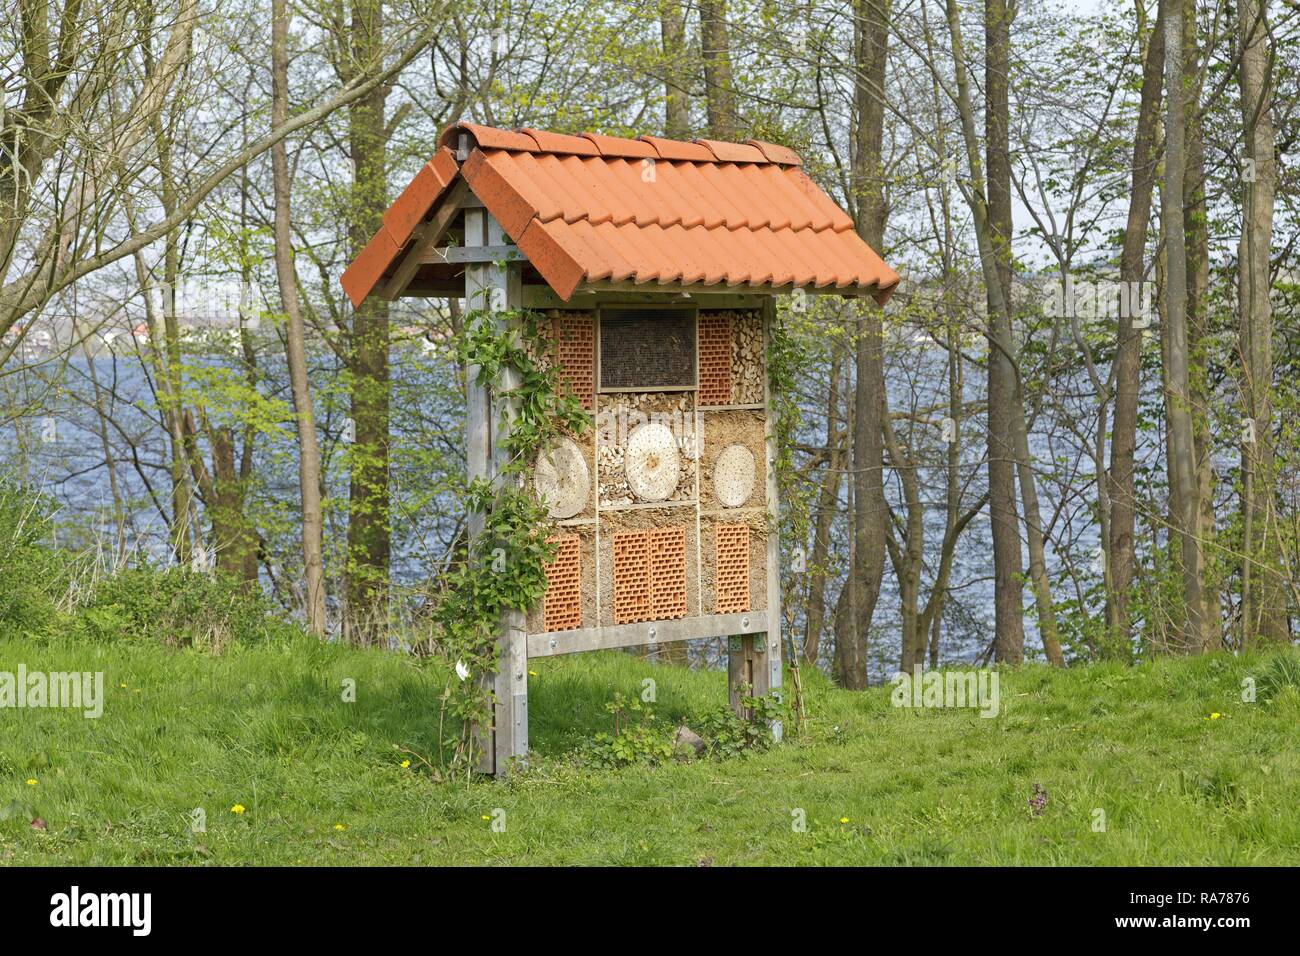 Insect hotel, Plön, Schleswig-Holstein, Germany Stock Photo